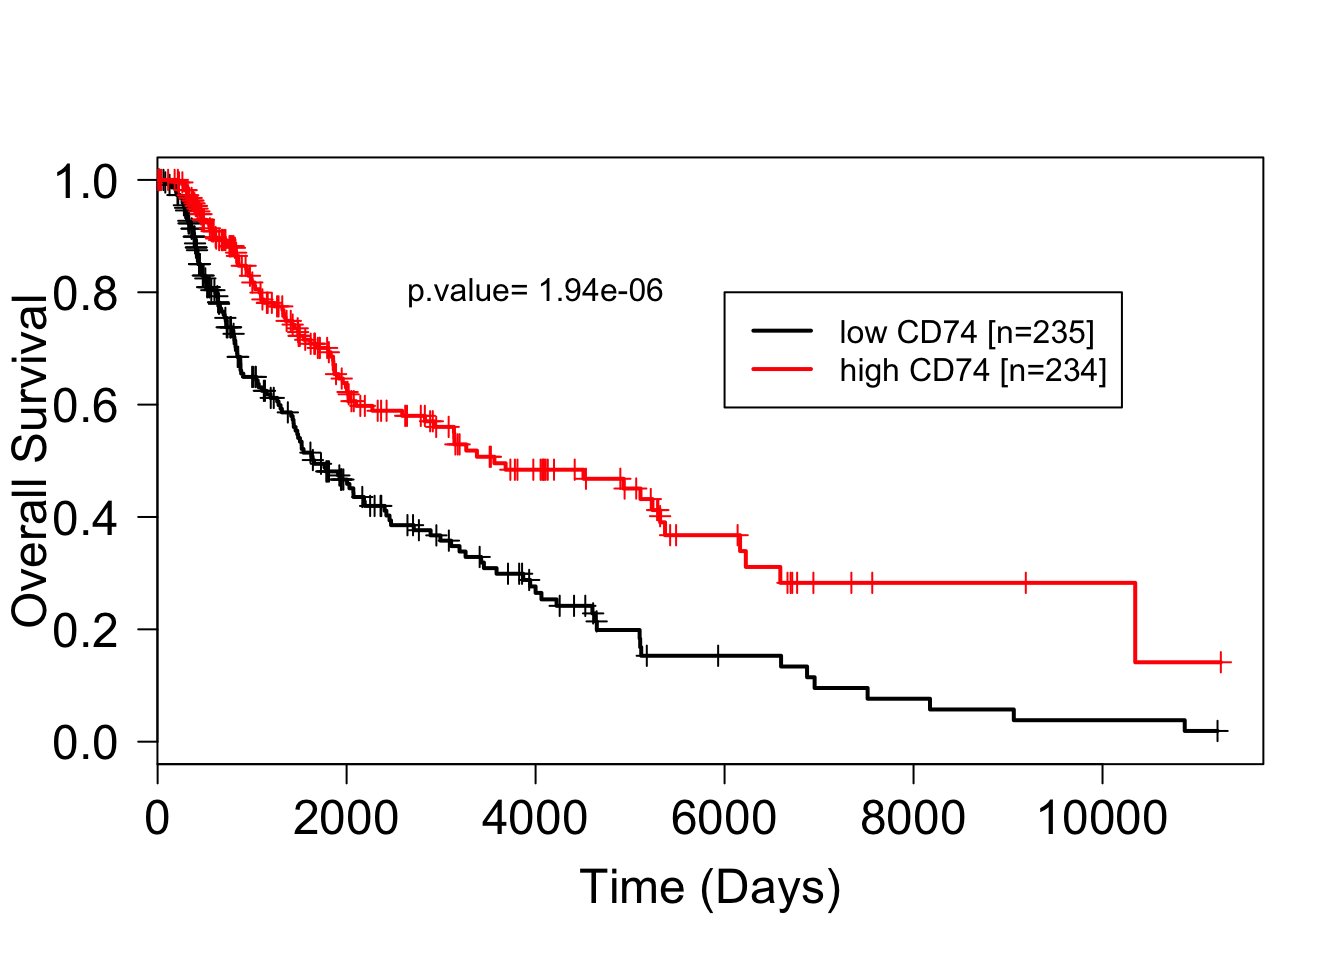 \label{fig:figure3}figure3:Kaplan Meier survival plot of melanoma patients in the TCGA databse according to high and low CD74 expression. Consistent with Ekmekcioglu2016, higher CD74 expression is associated with better prognosis.